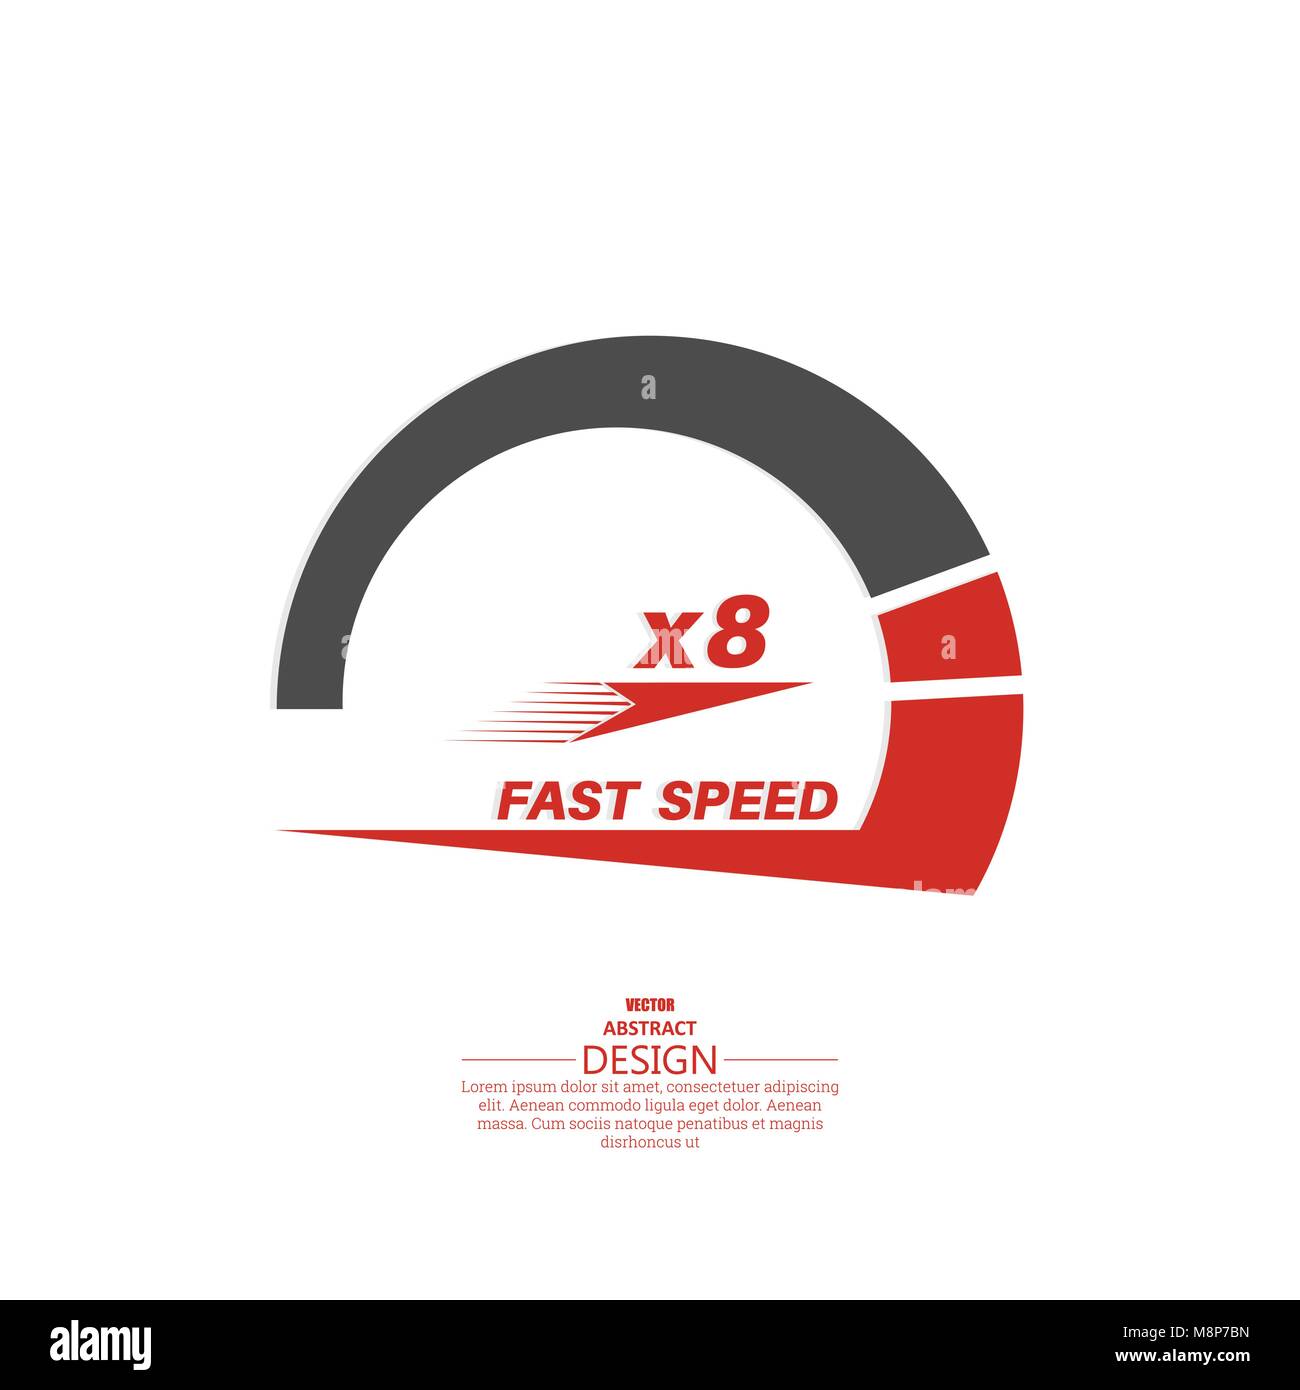 Vector speedometer scale. Concept of speed and acceleration. Vector element of graphic design Stock Vector